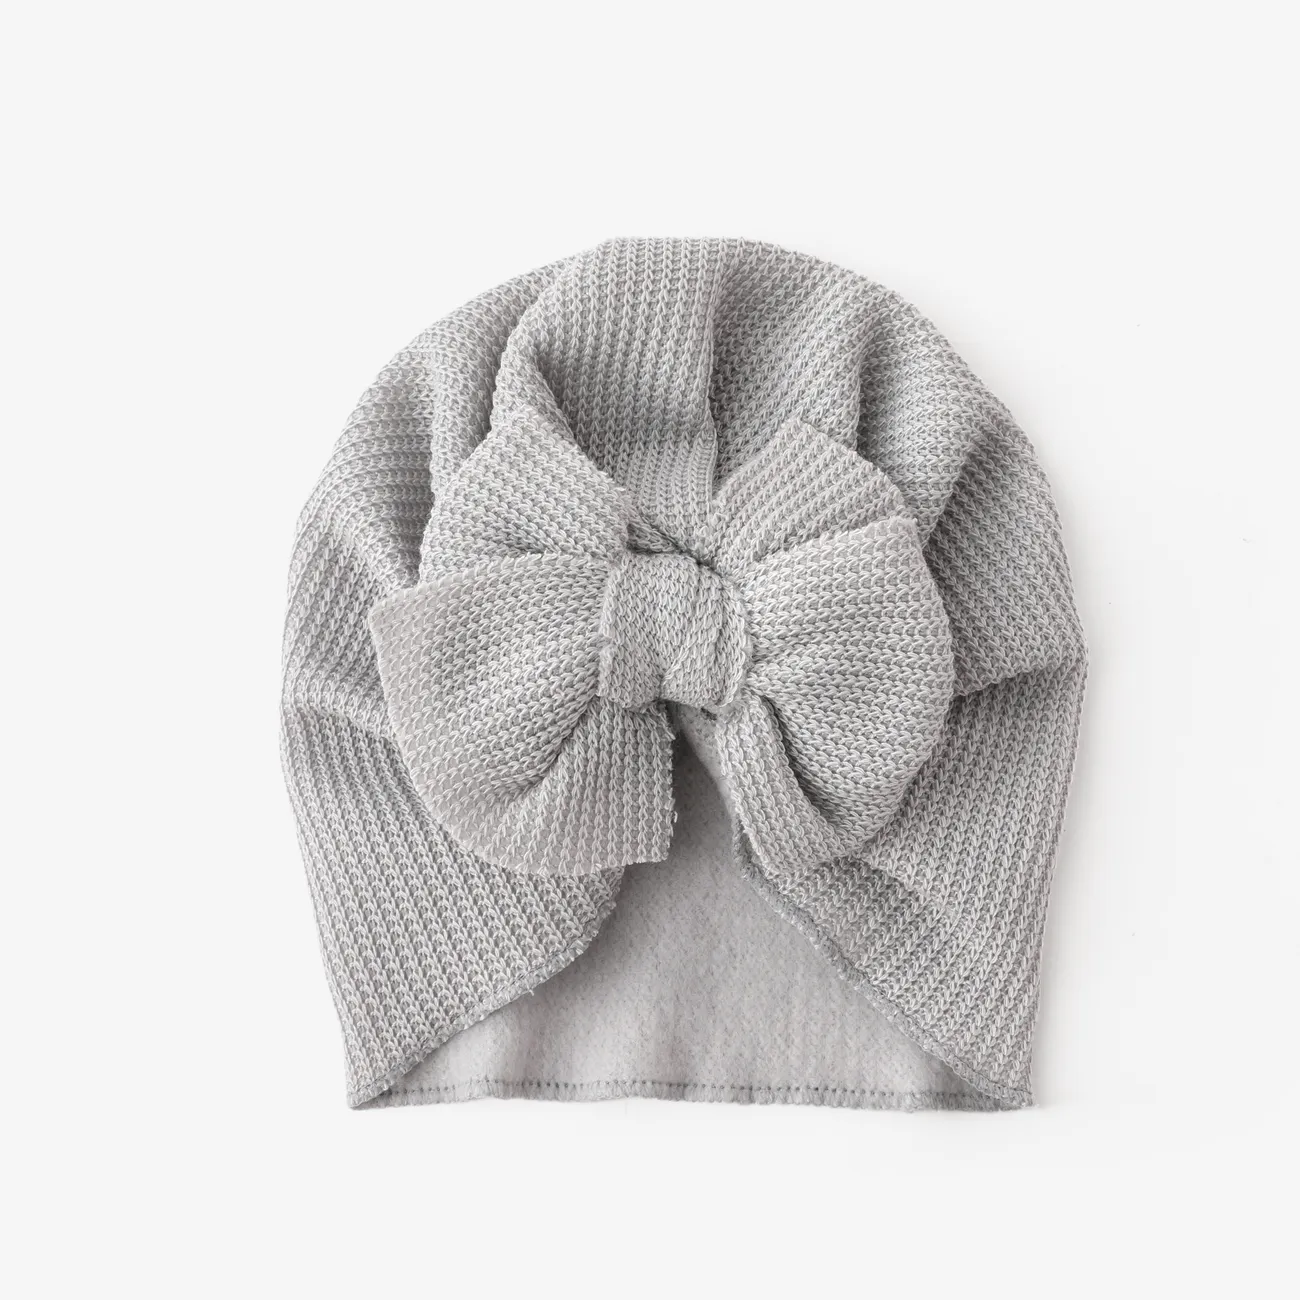 Baby's Knitted double-layered bow hat Grey big image 1